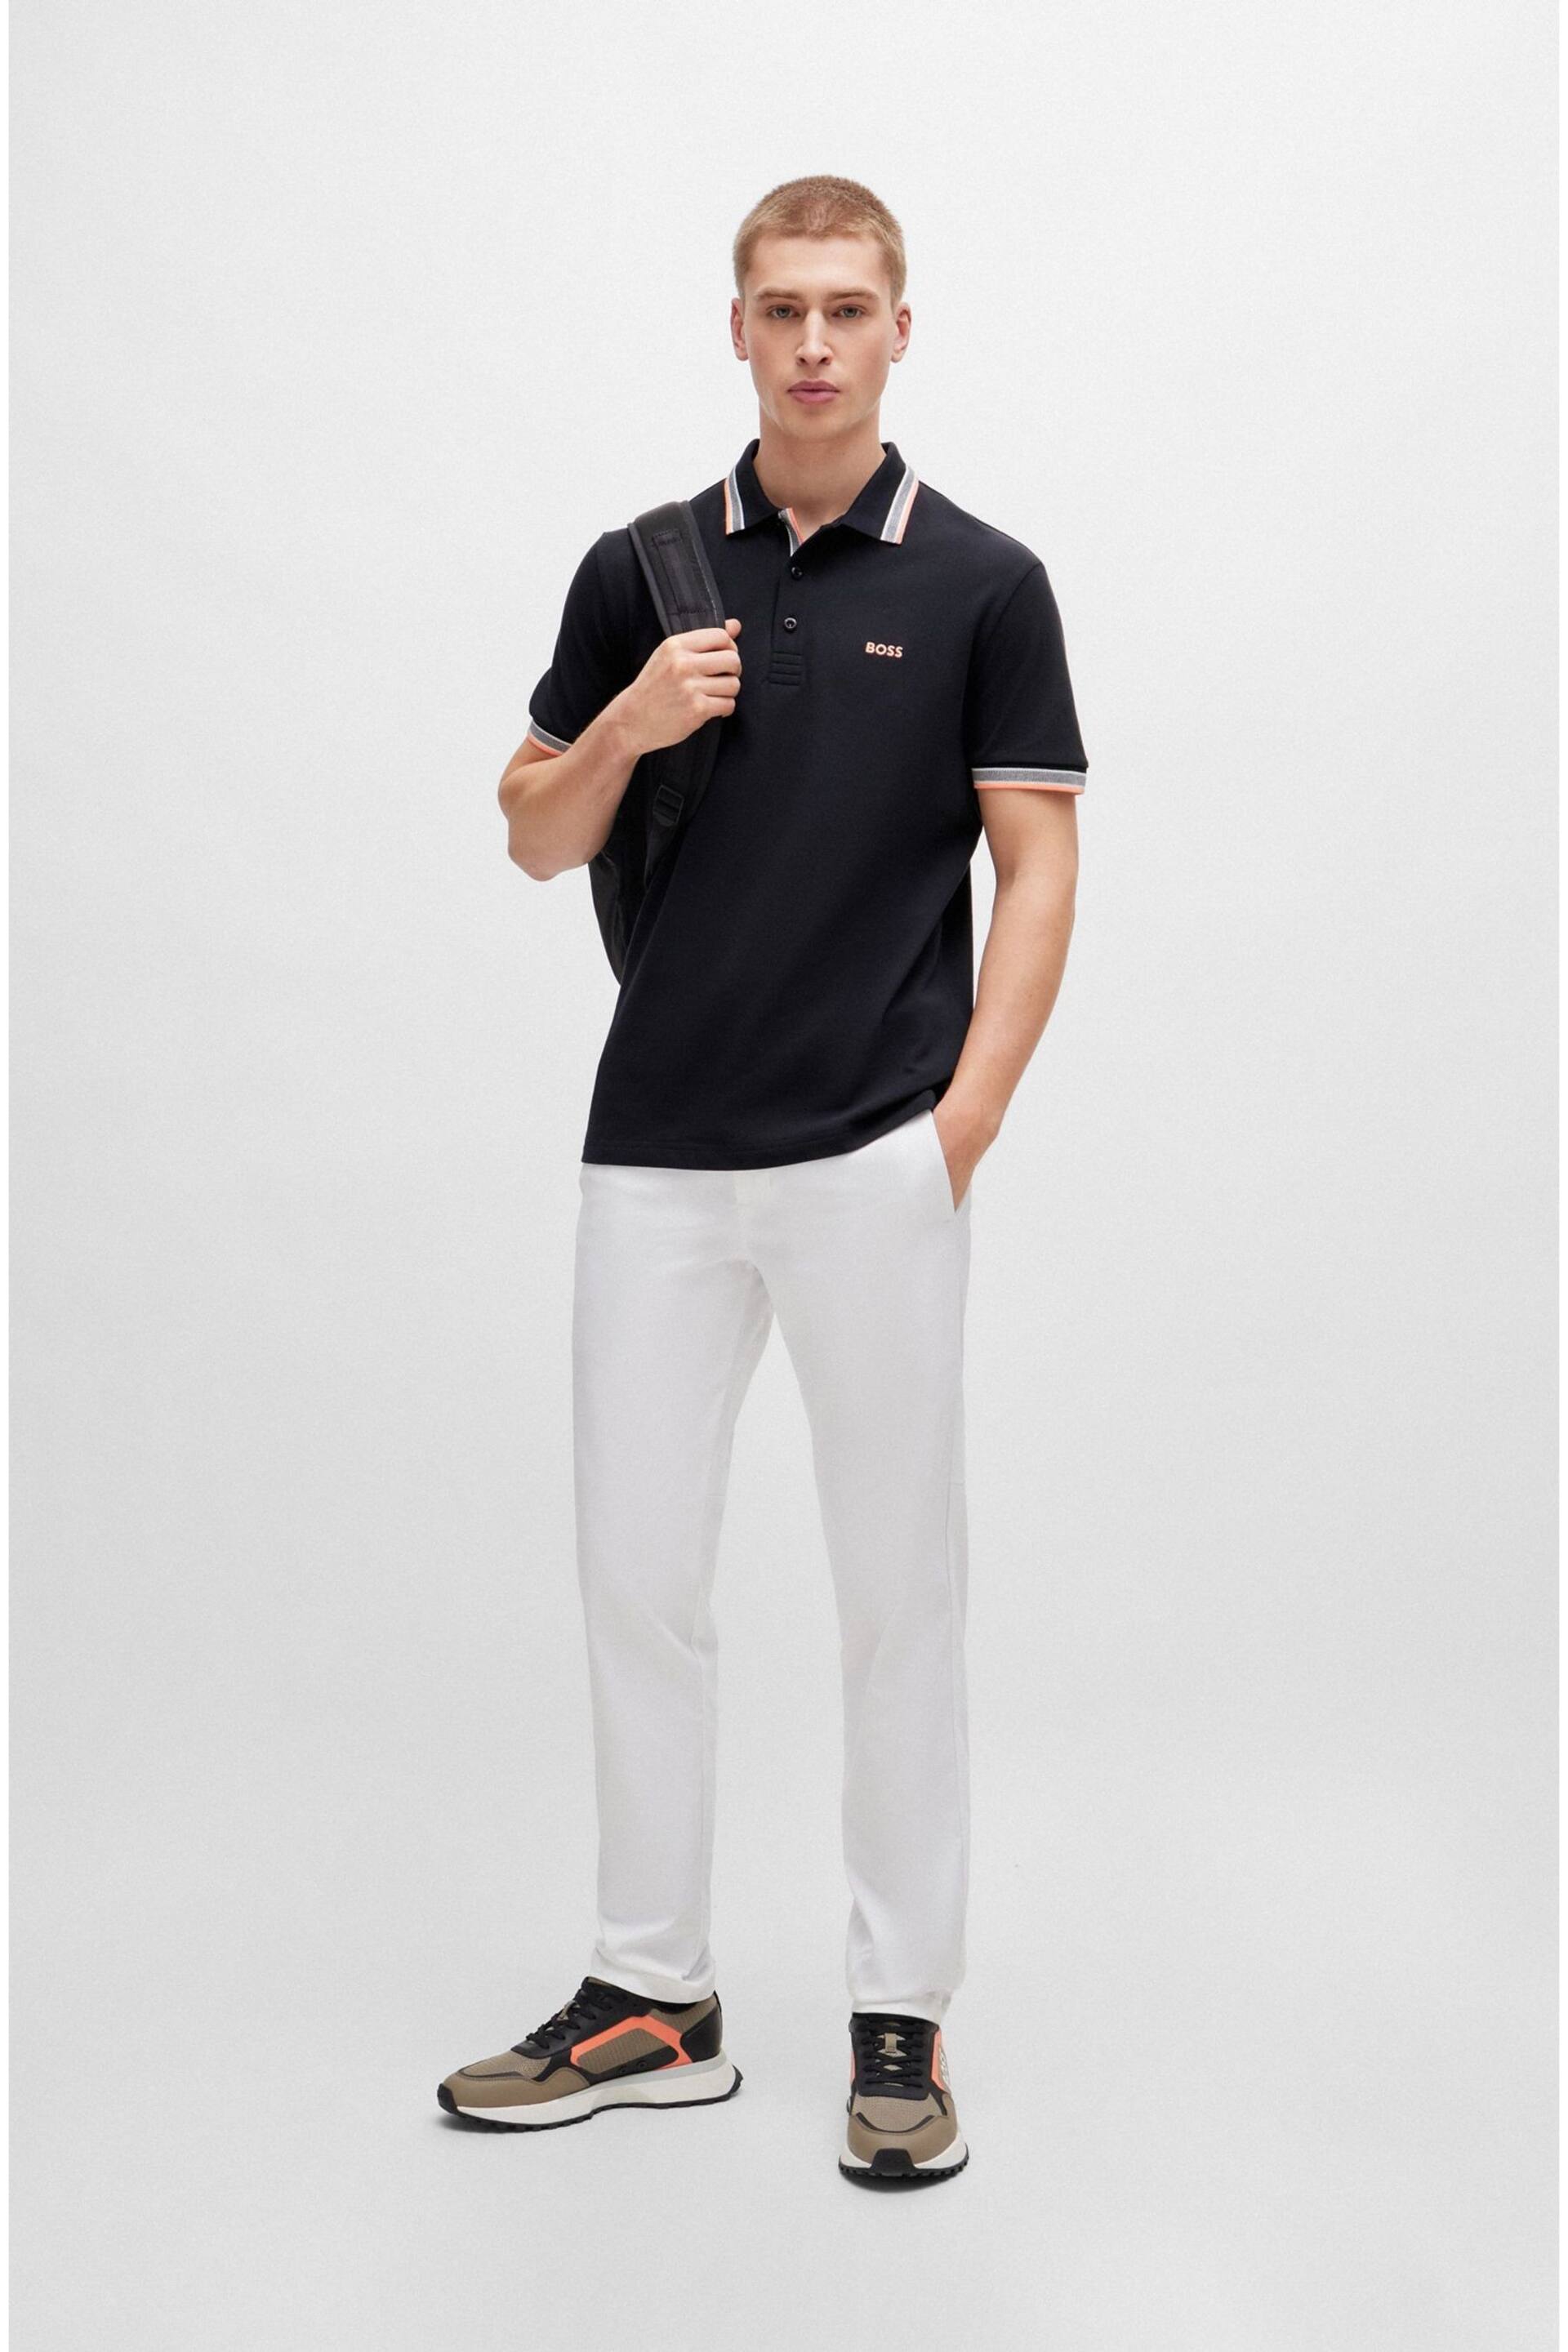 BOSS Black/Orange Tipping Cotton Polo Shirt With Contrast Logo Details - Image 2 of 5